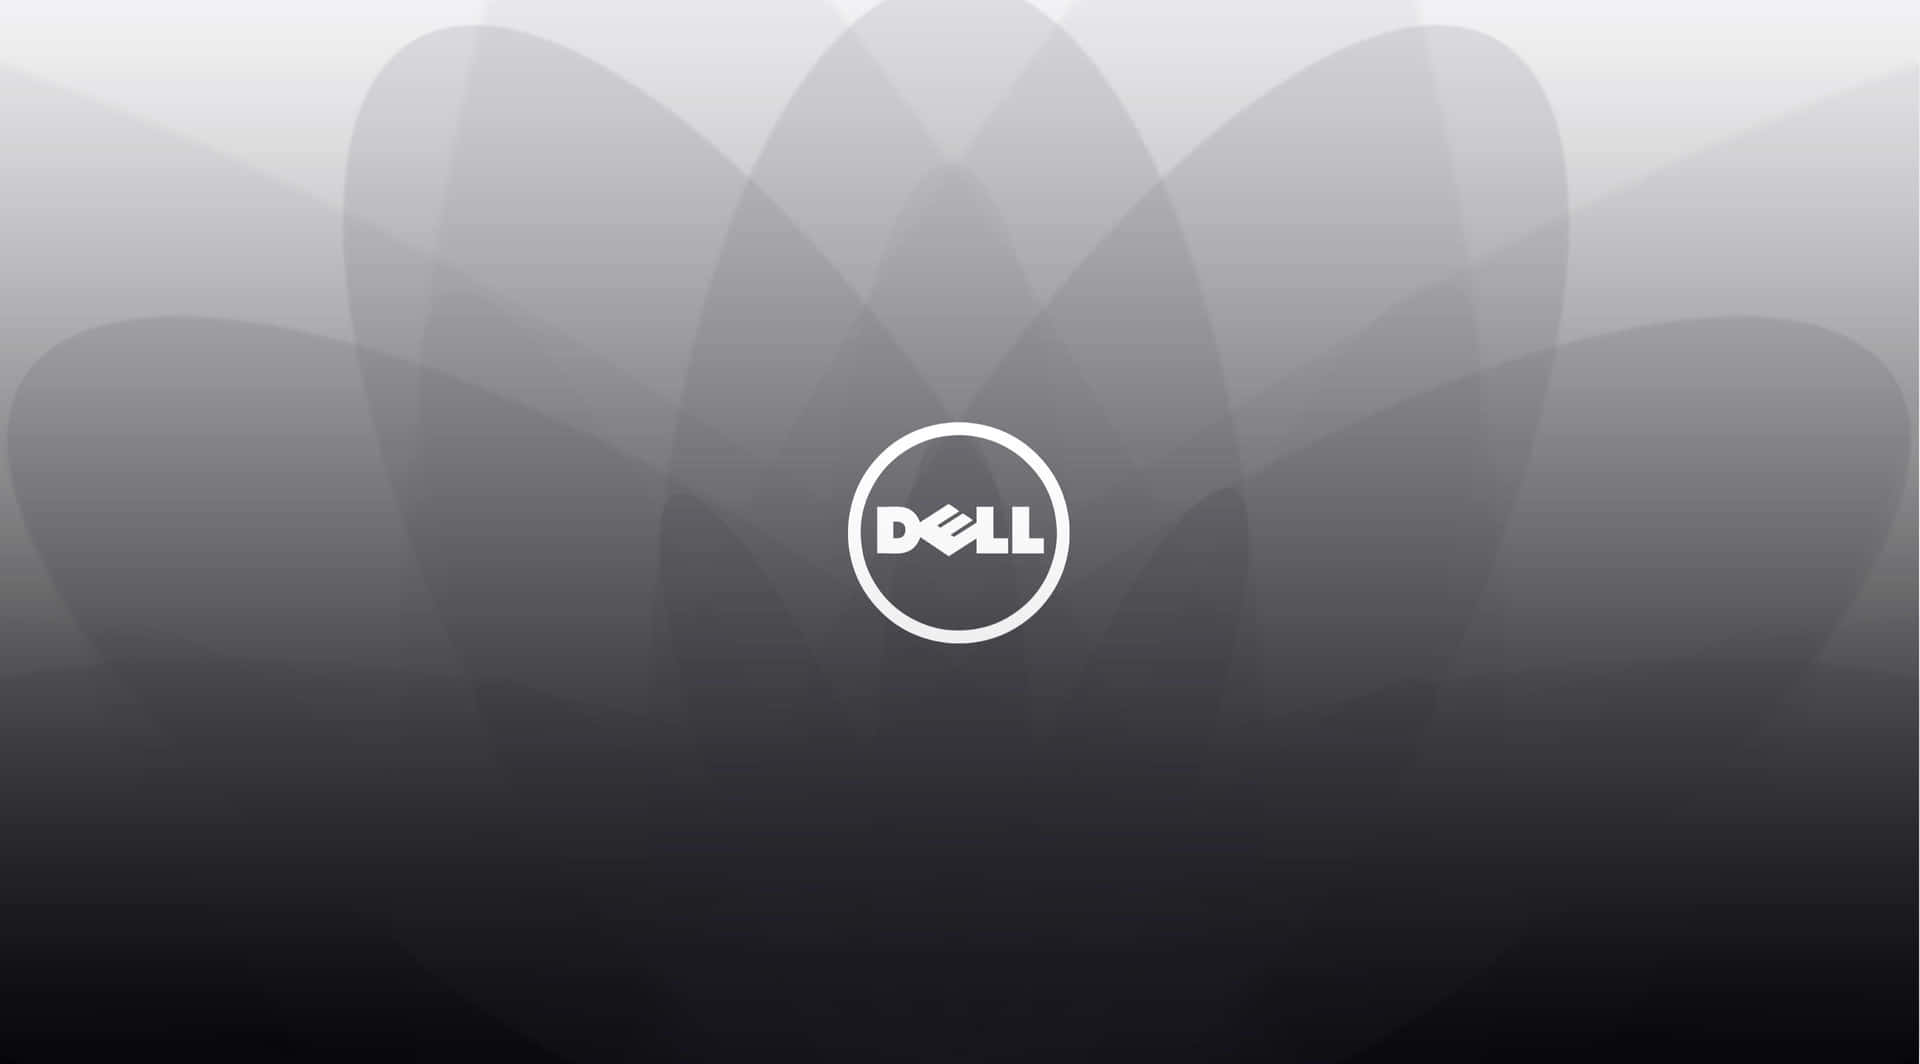 Dell Logo On A Black Background